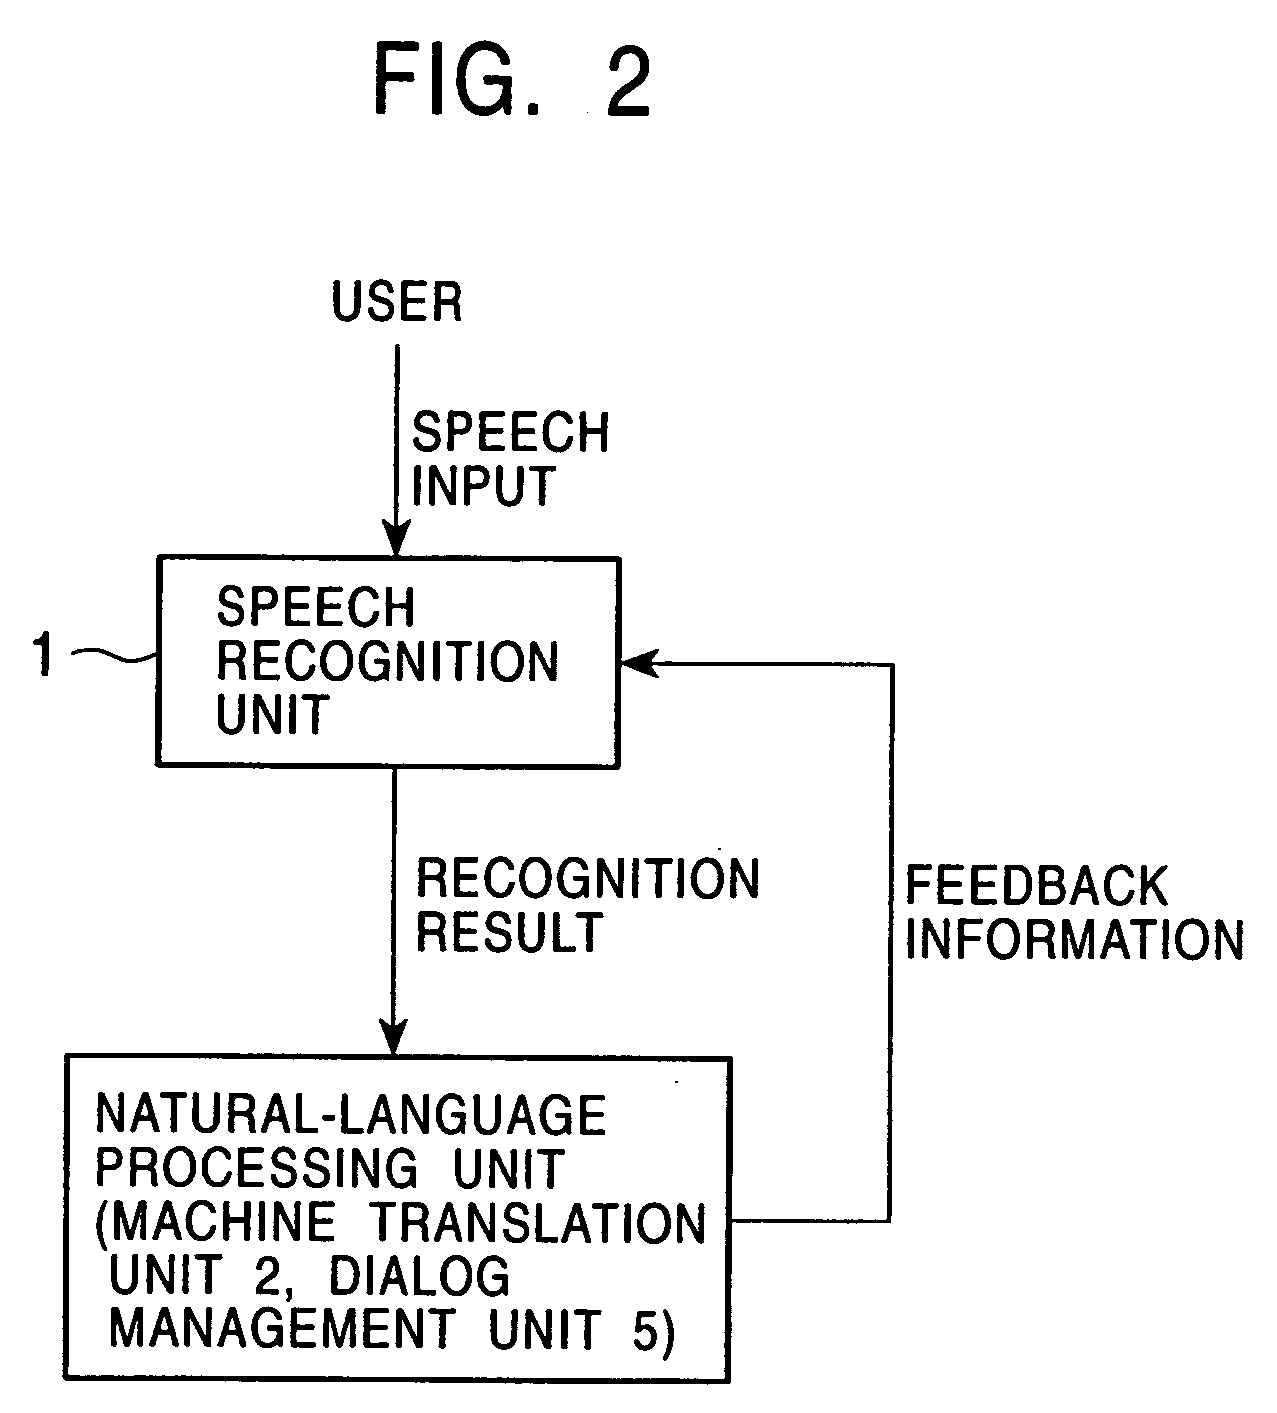 Speech recognition with feeback from natural language processing for adaptation of acoustic model